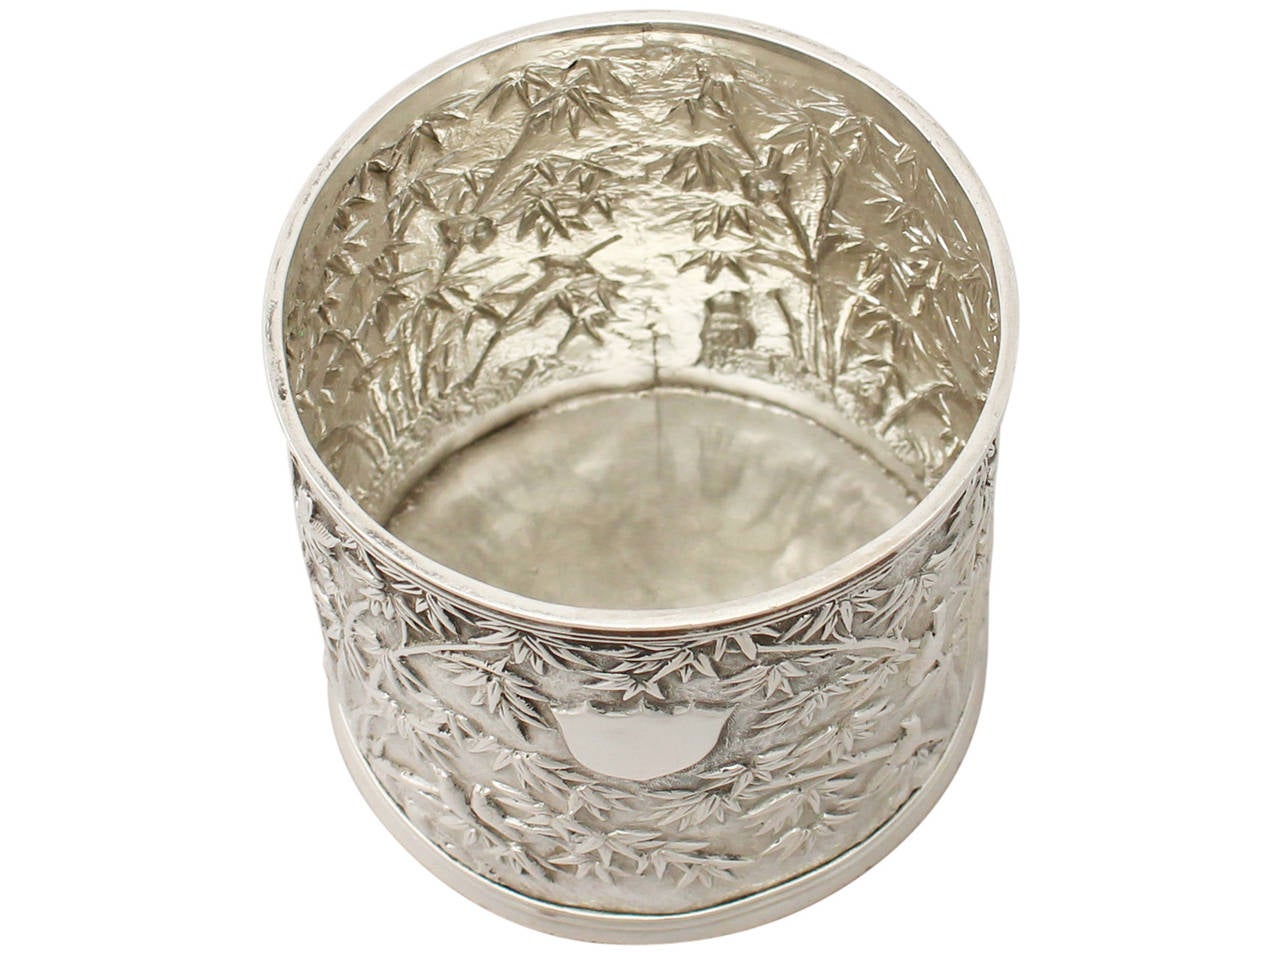 Late 19th Century Chinese Export Silver Tea Caddy, Antique, circa 1890